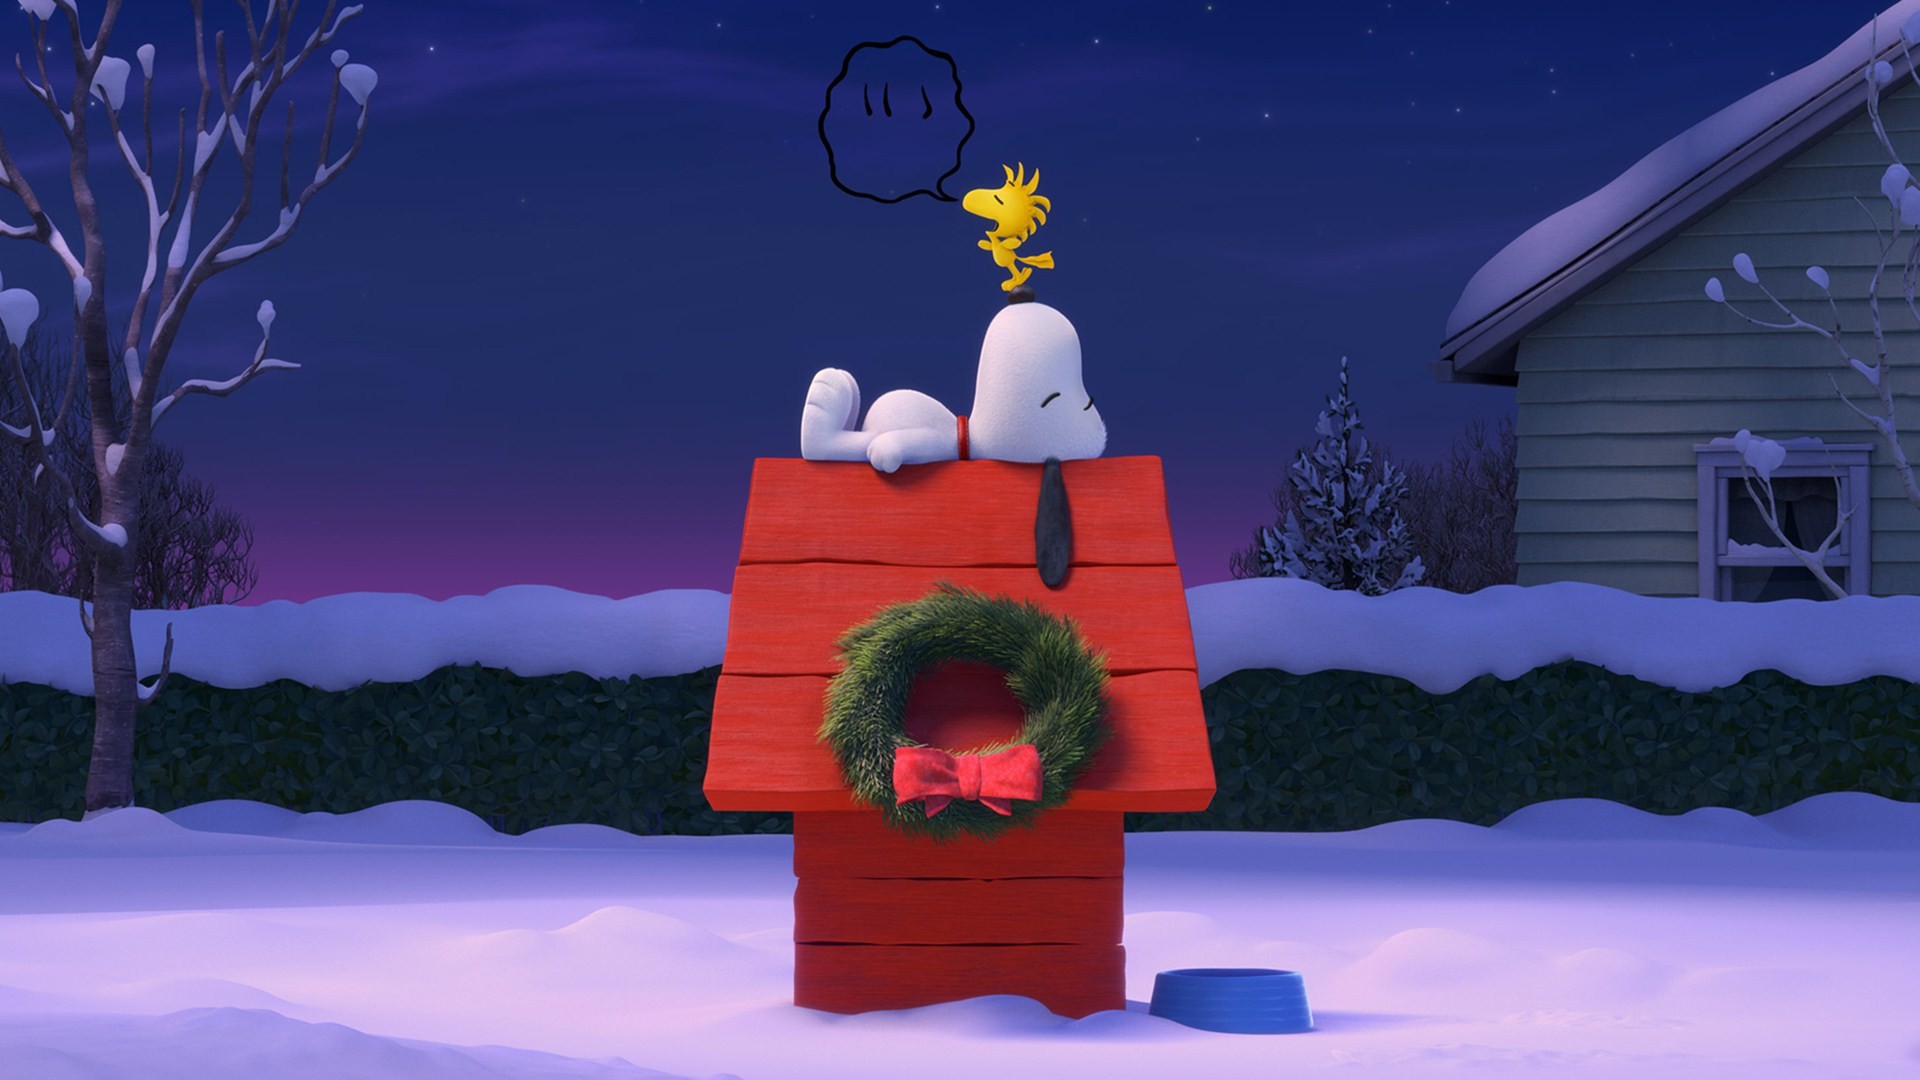 1920x1080 The Peanuts 2015 Movie Snoopy HD Wallpaper - DreamLoveWallpapers